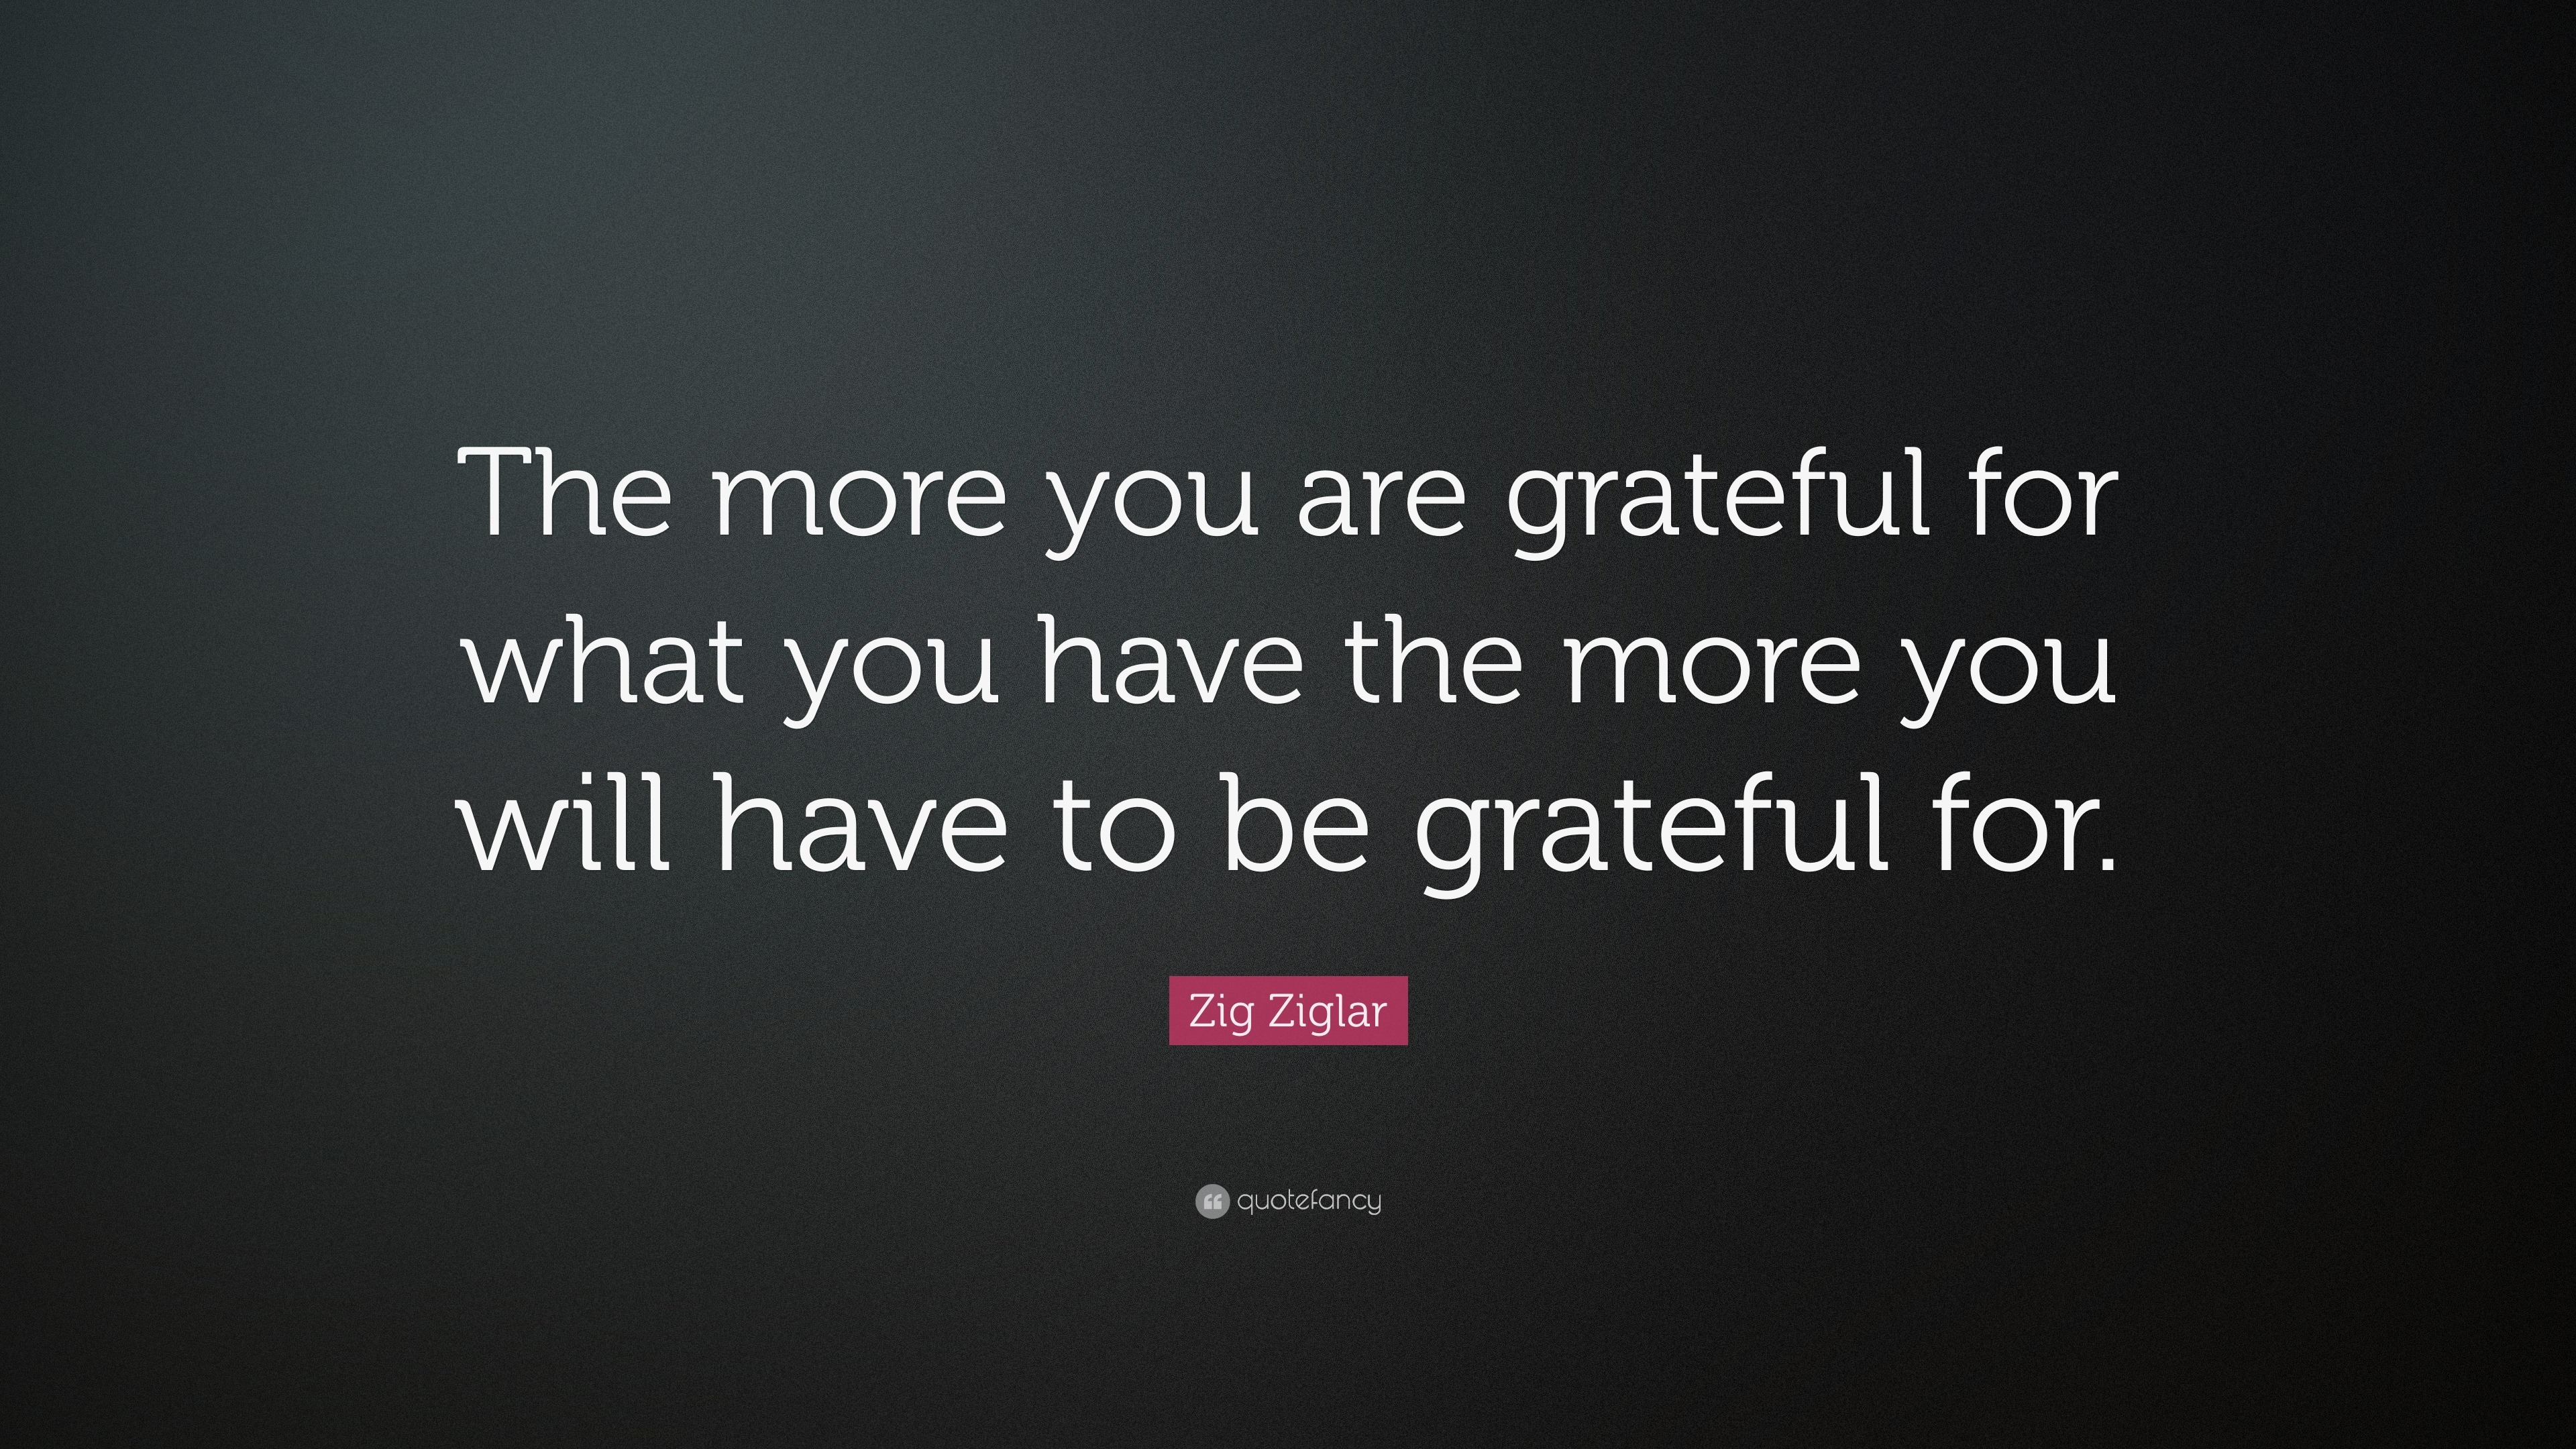 Zig Ziglar Quote: “The more you are grateful for what you have the more